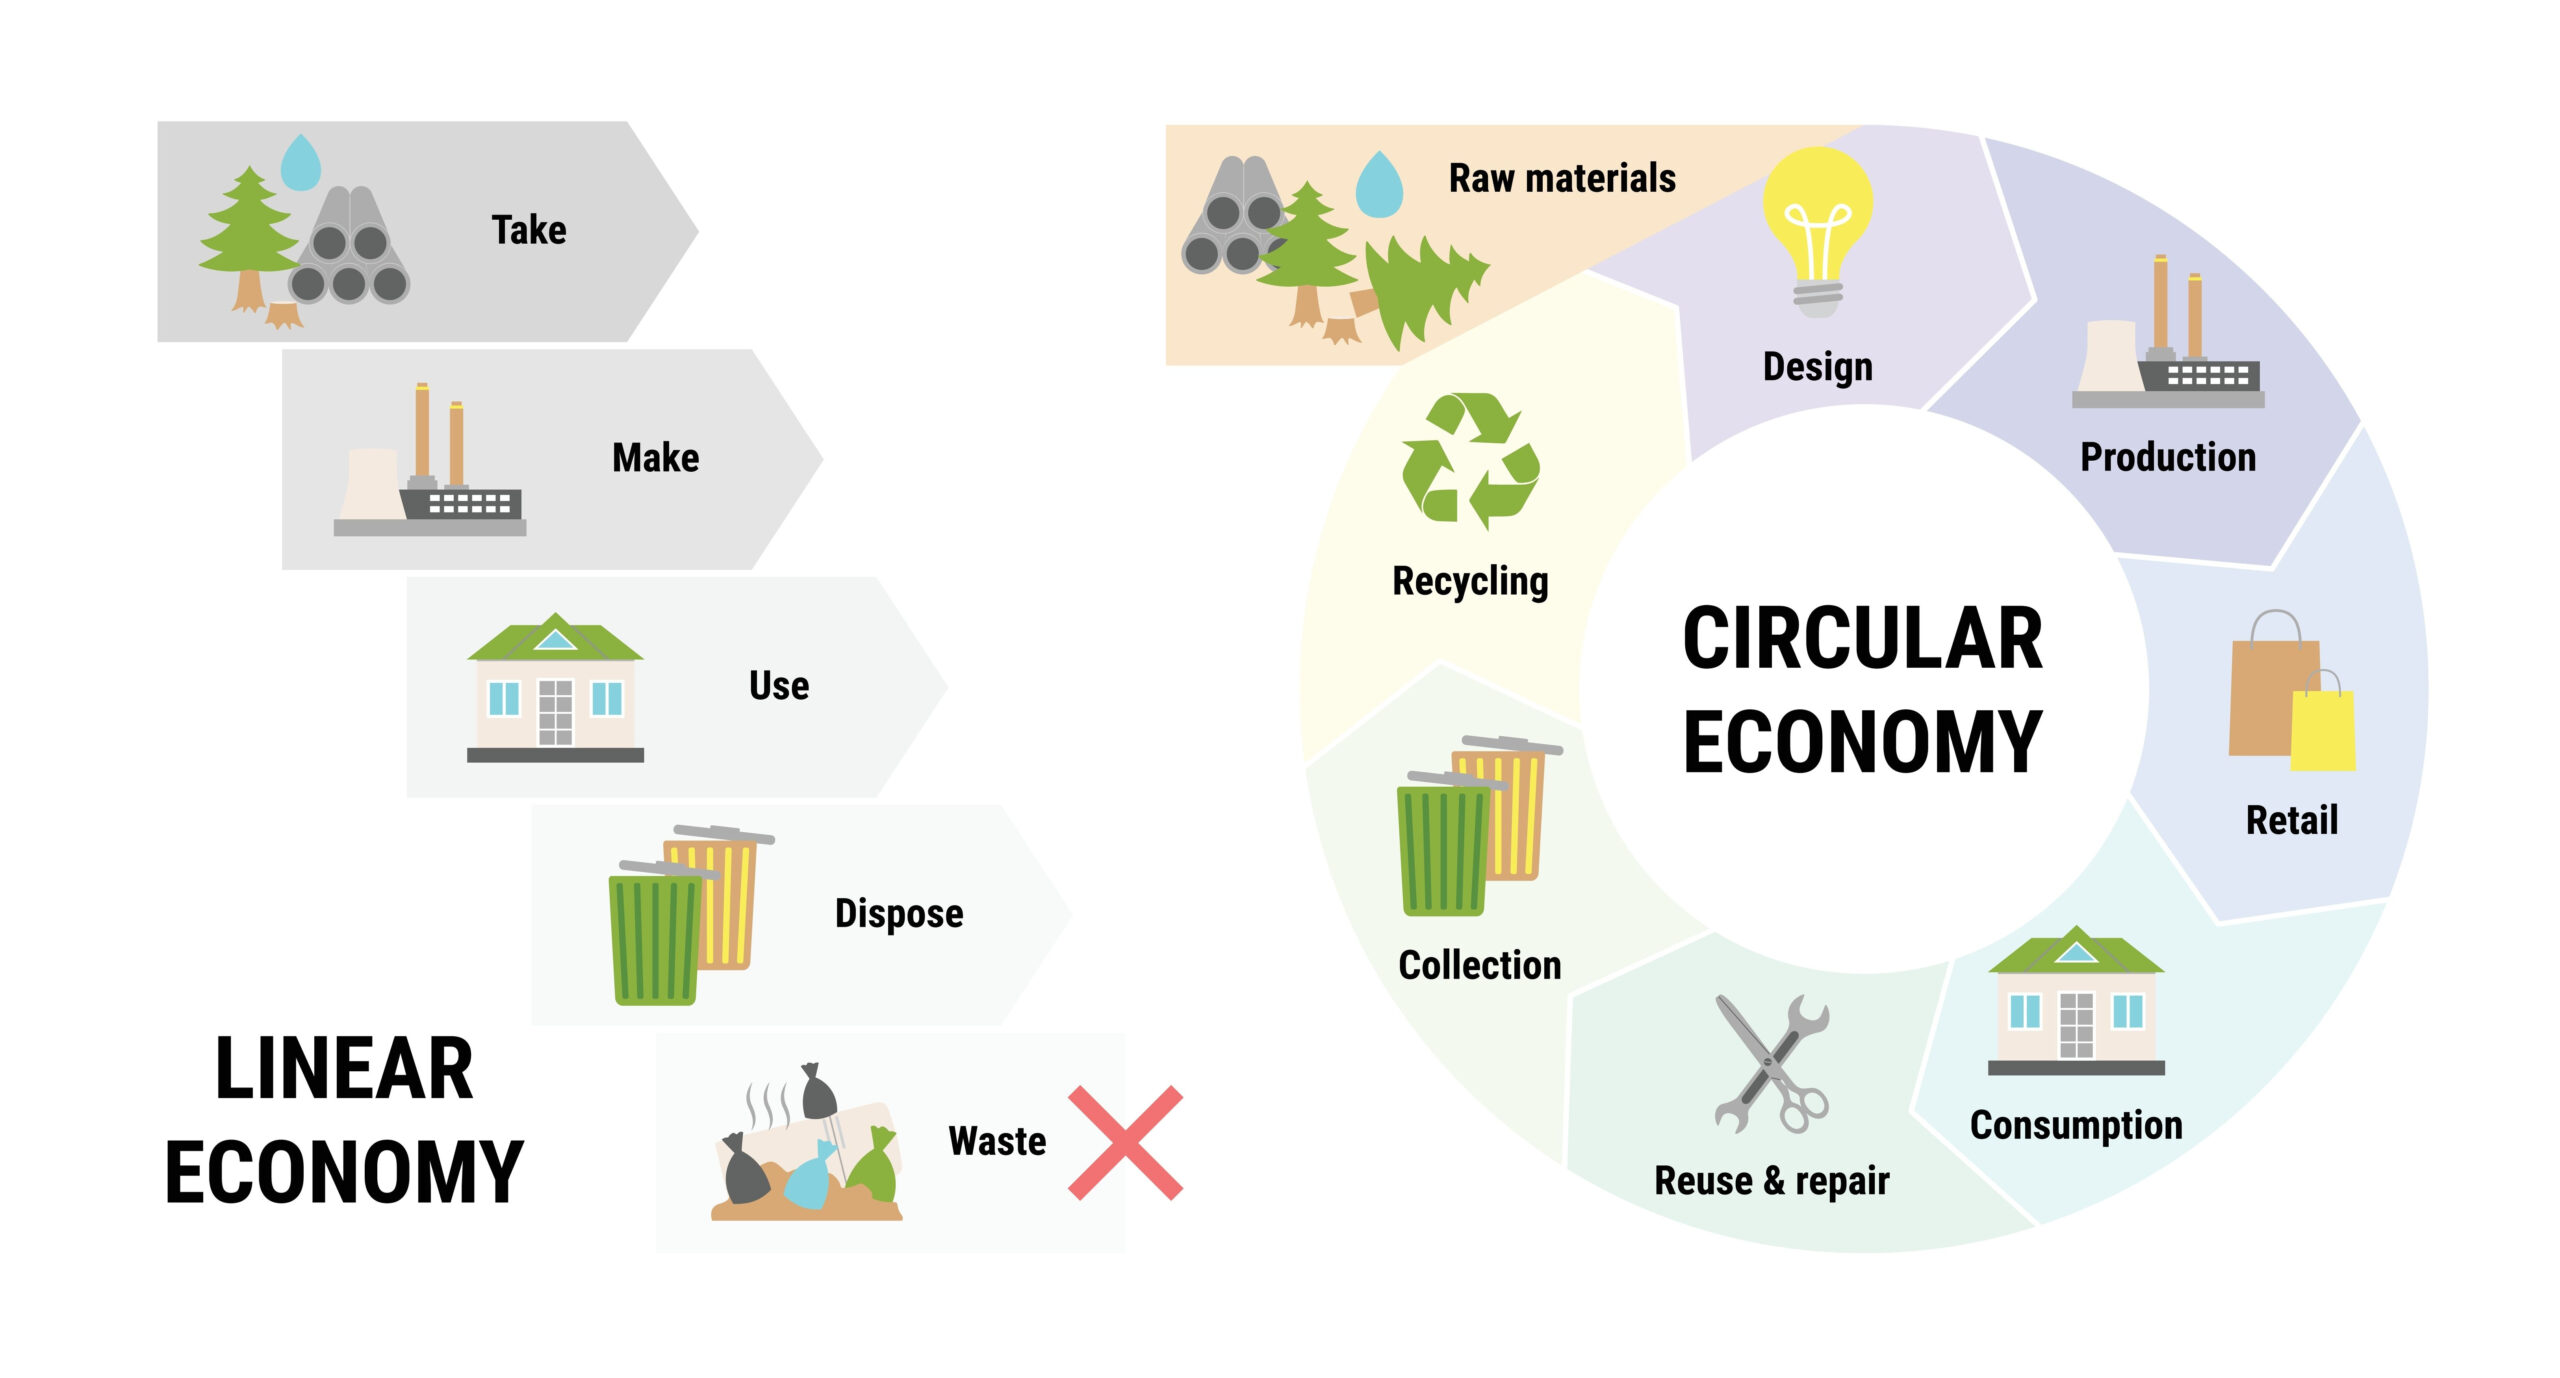 What is the Circular Economy & can we realistically achieve it?